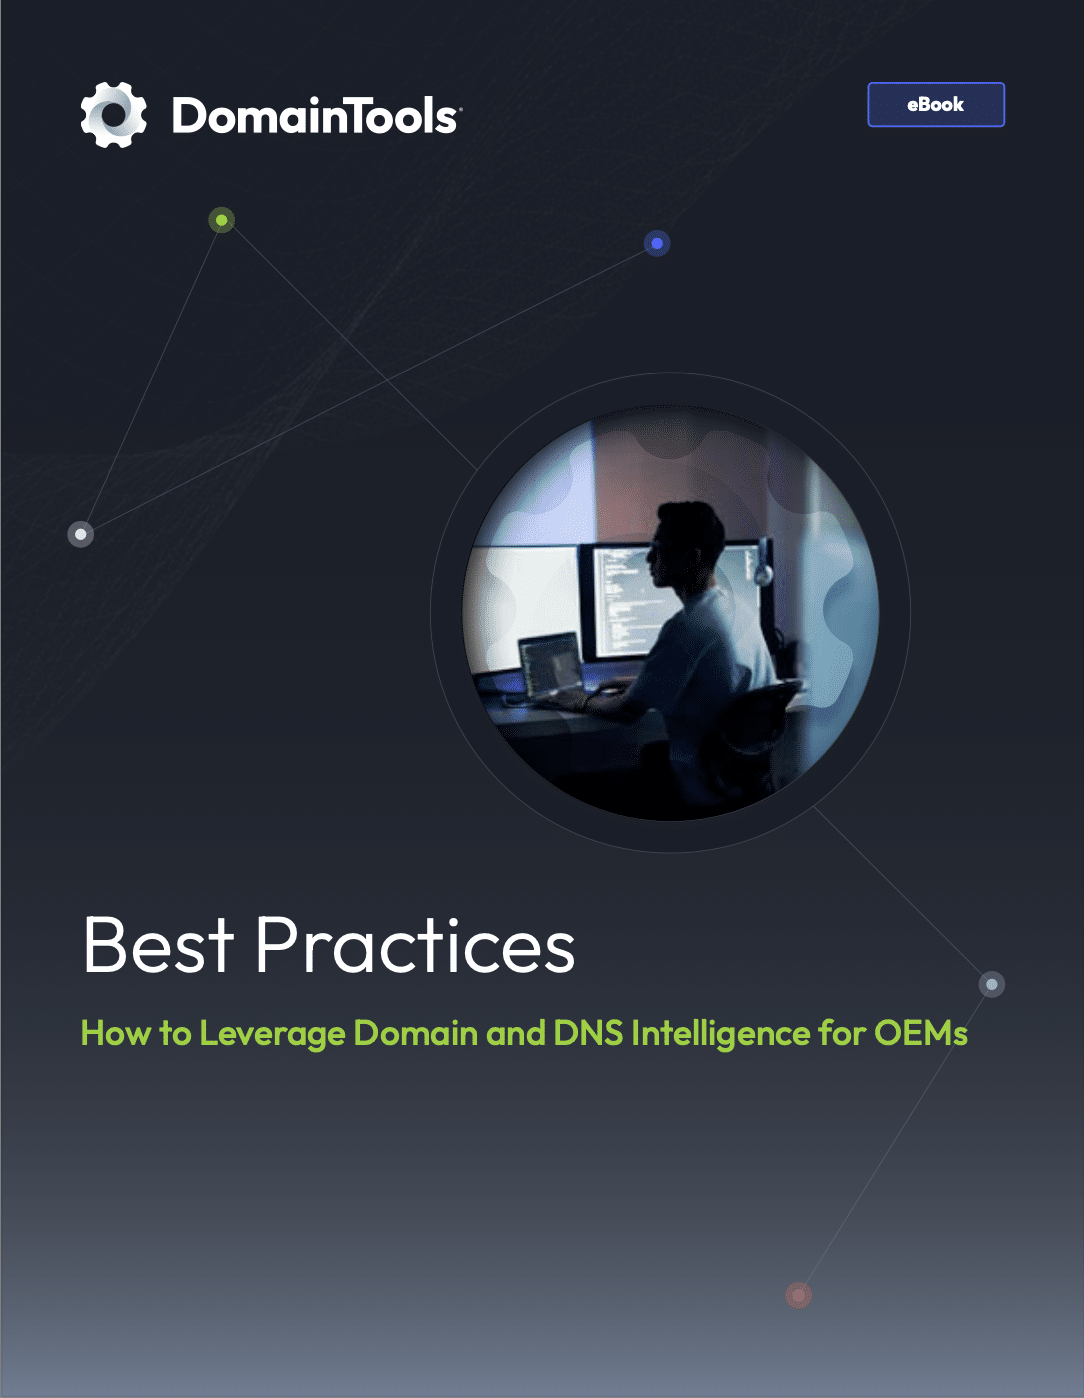 A digital ebook cover titled "How to Leverage Domain and DNS Intelligence for OEMs" by DomainTools. The cover features a silhouette of a person using a computer in a dark room.